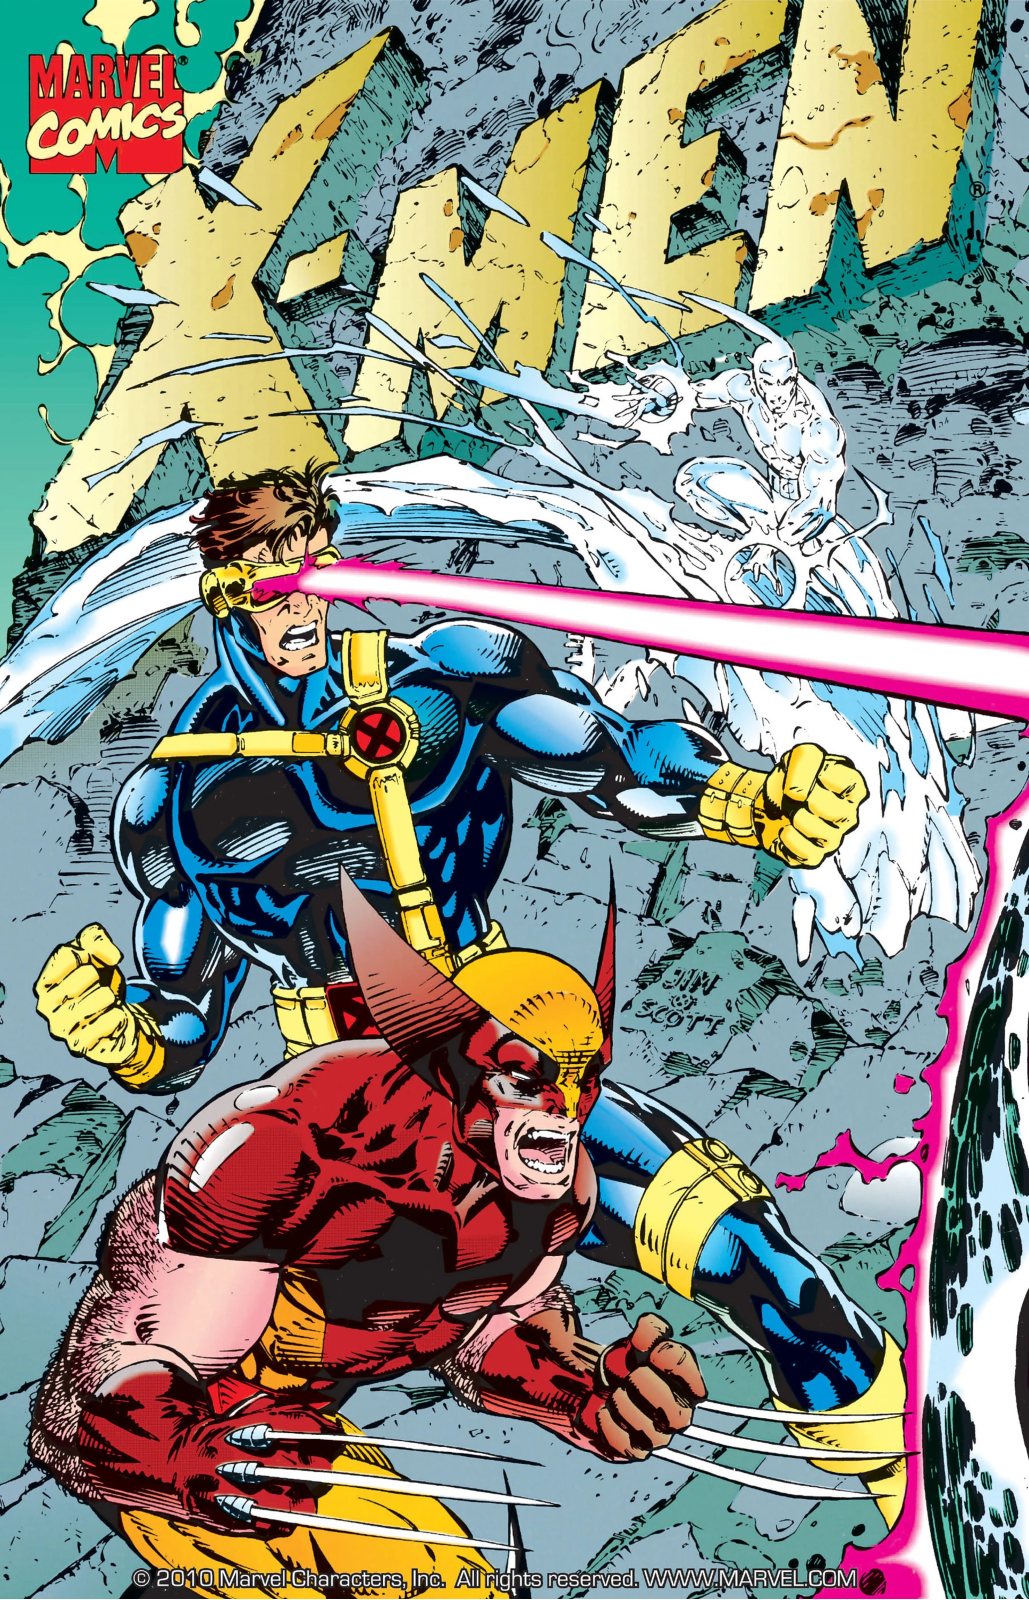 Cyclops and Wolverine rush into battle on the cover of X-Men (Vol. 2) #1 by Marvel Comics